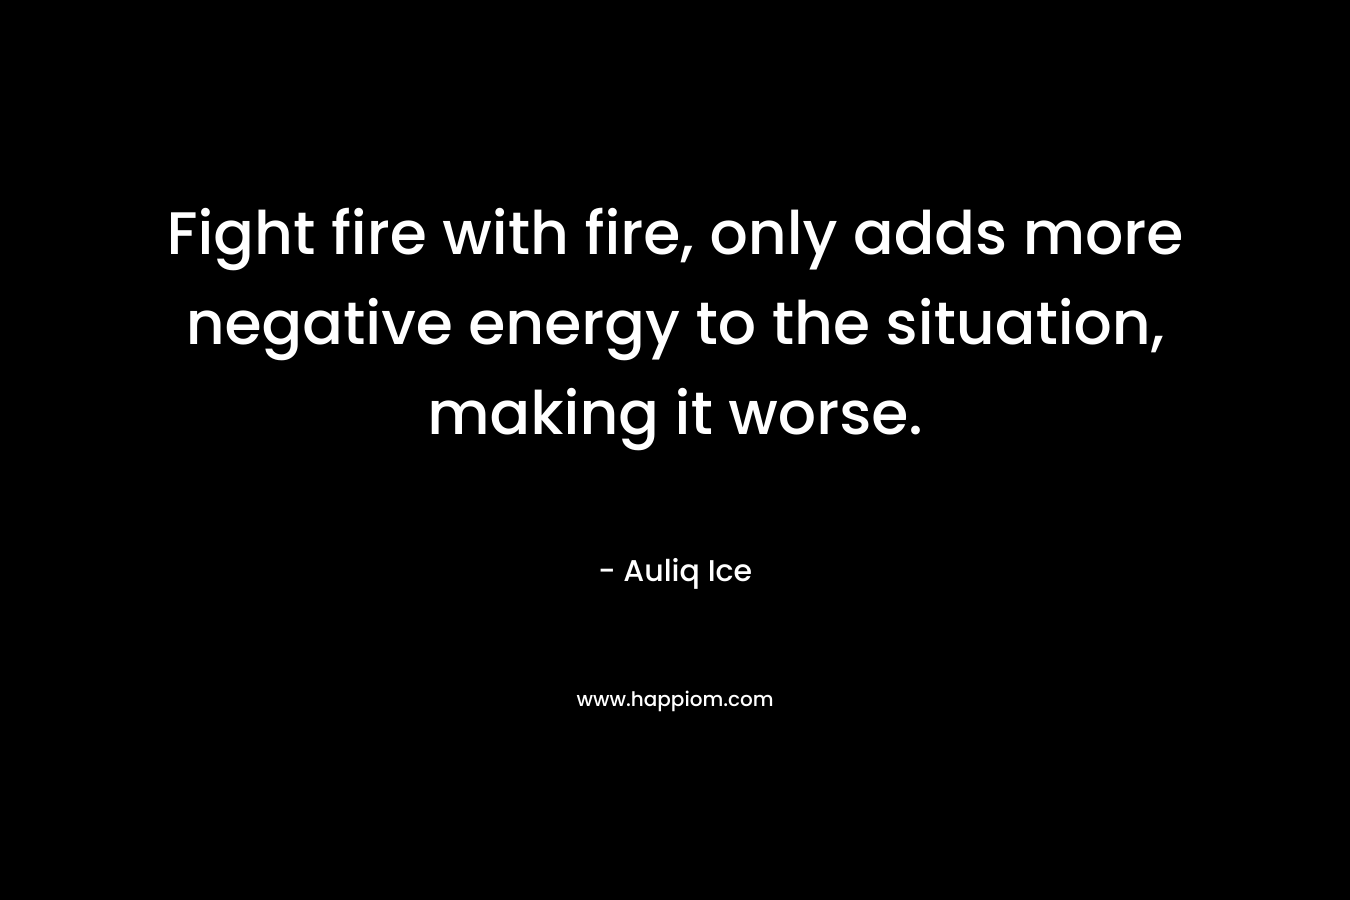 Fight fire with fire, only adds more negative energy to the situation, making it worse. – Auliq Ice